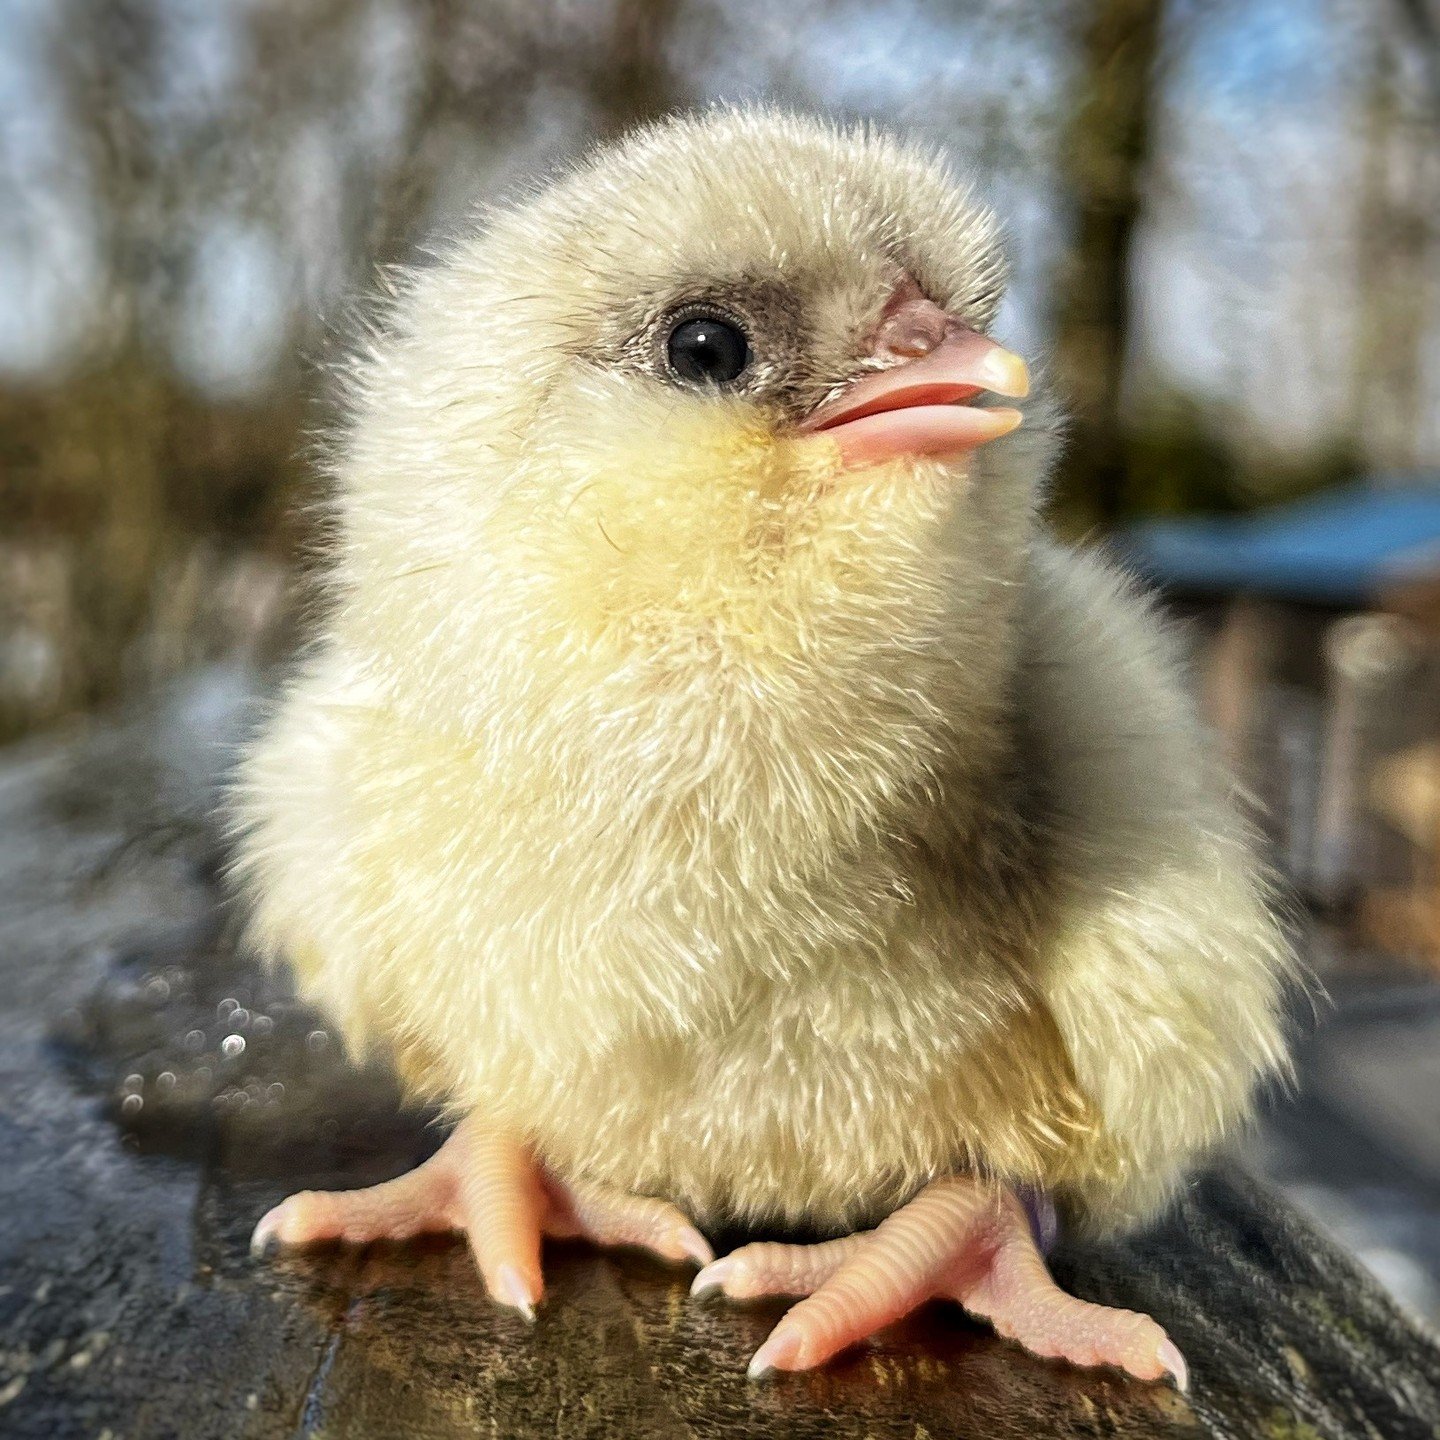 Brooders are overfull! BOGO chicks IF you buy at least three chicks off the website AND pick up on Sunday. You can pick your free chicks from the list of what's available when you arrive. Good while supplies last. 

Hatched 4/8:
2 Blue BBS Ameraucana